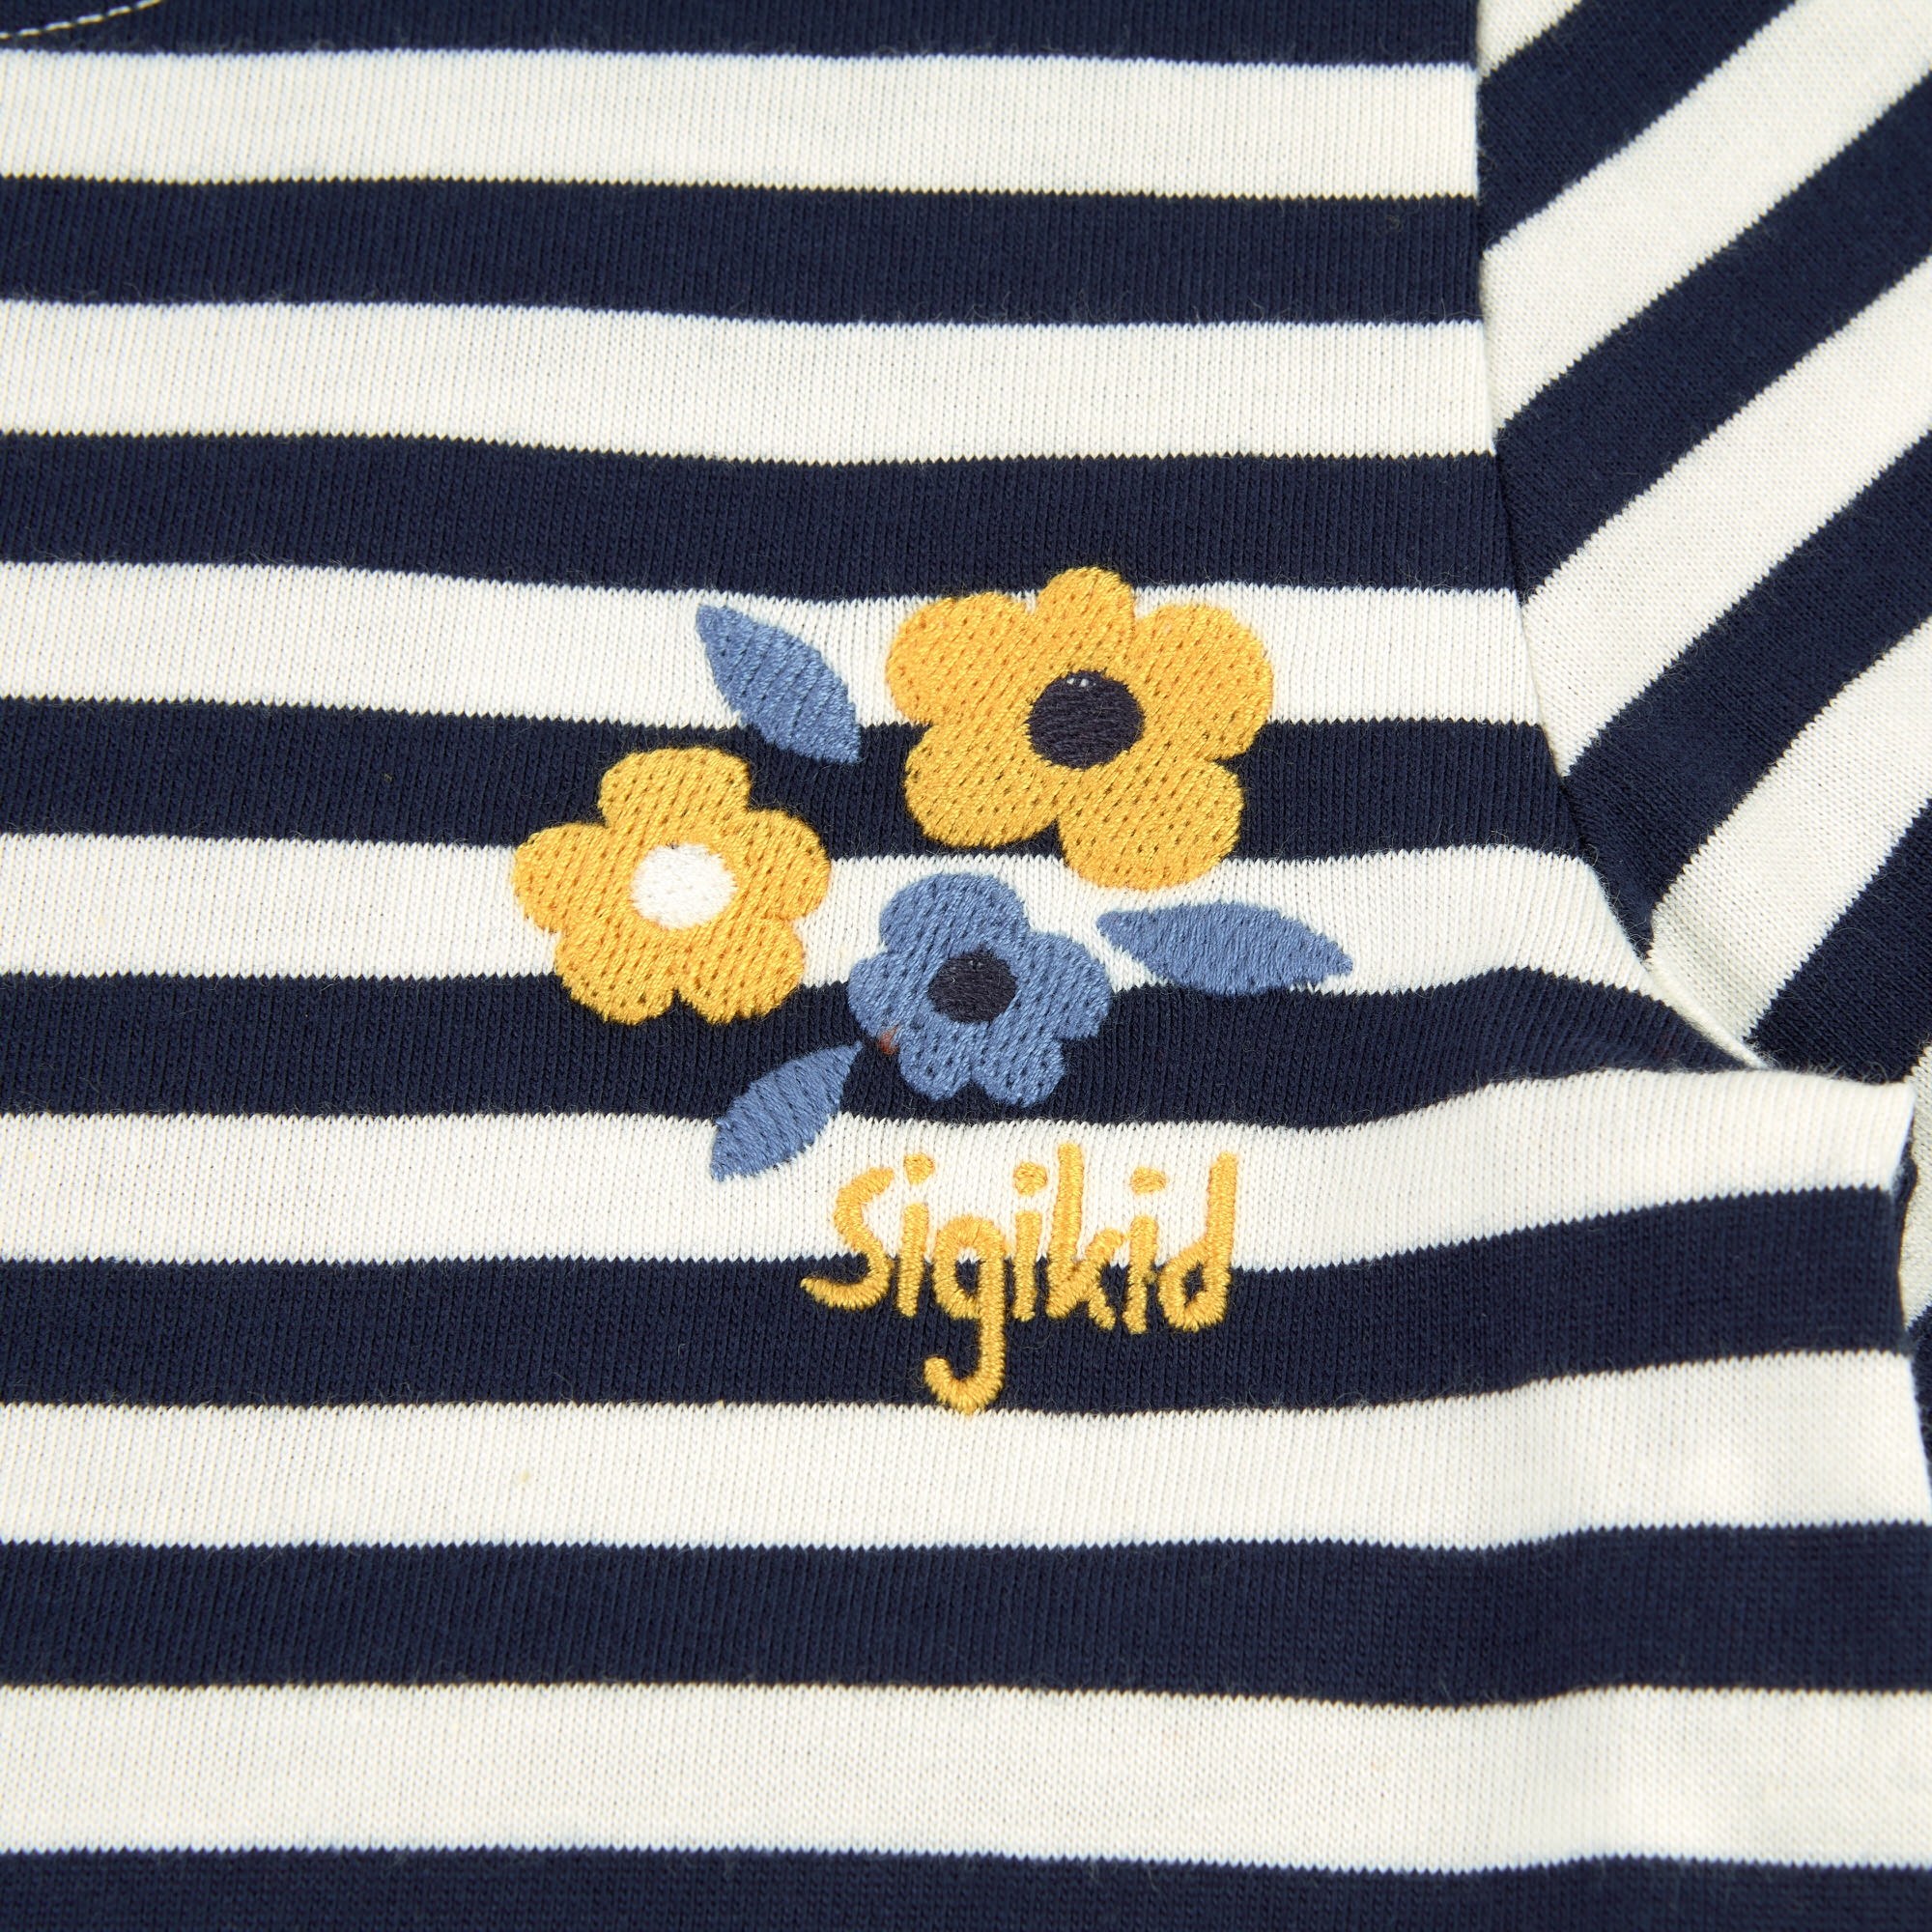 Navy/white striped kids' T-shirt with flower embroidery